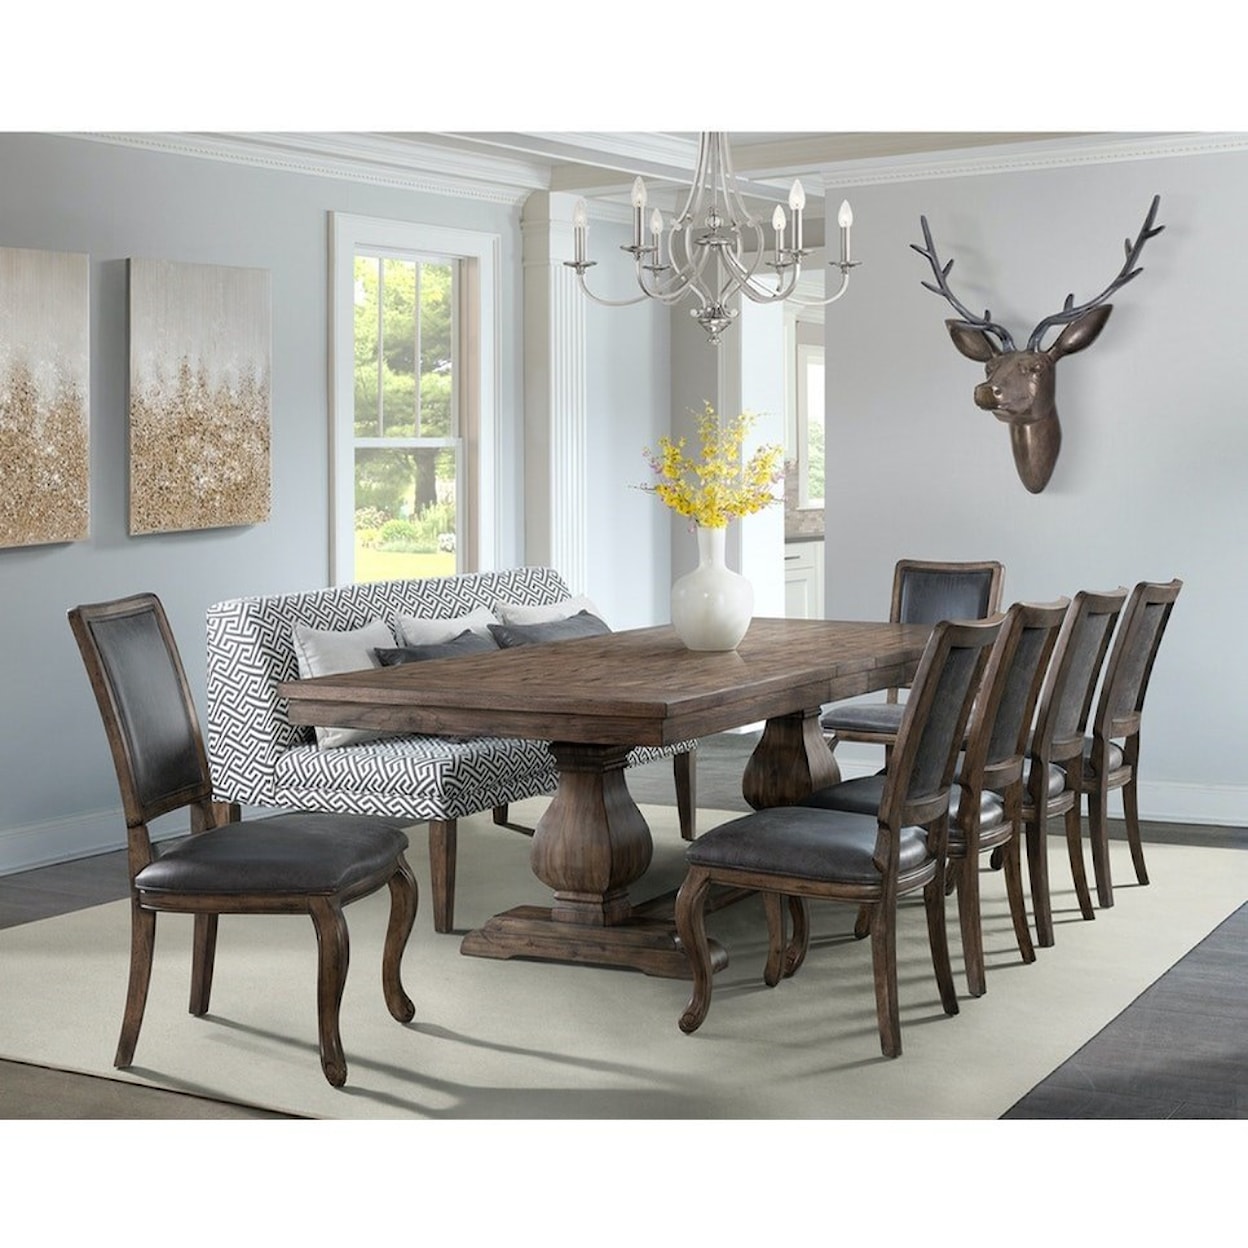 Elements Gramercy 8-Piece Table and Chair Set with Bench